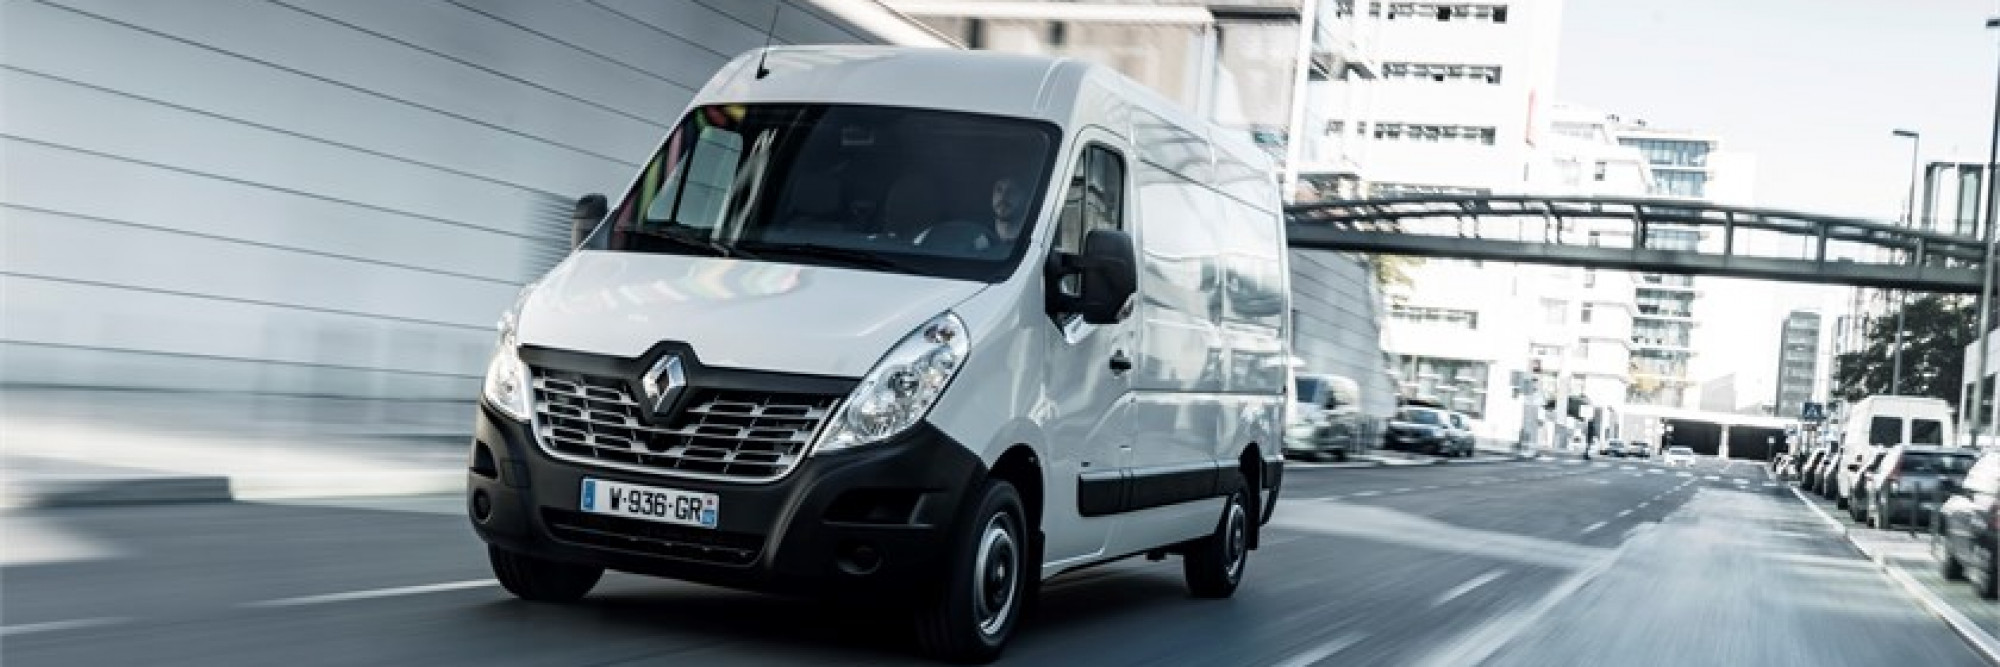 21204402 2018 Renault Master Z E tests drive and electric LCV range in Lisboa